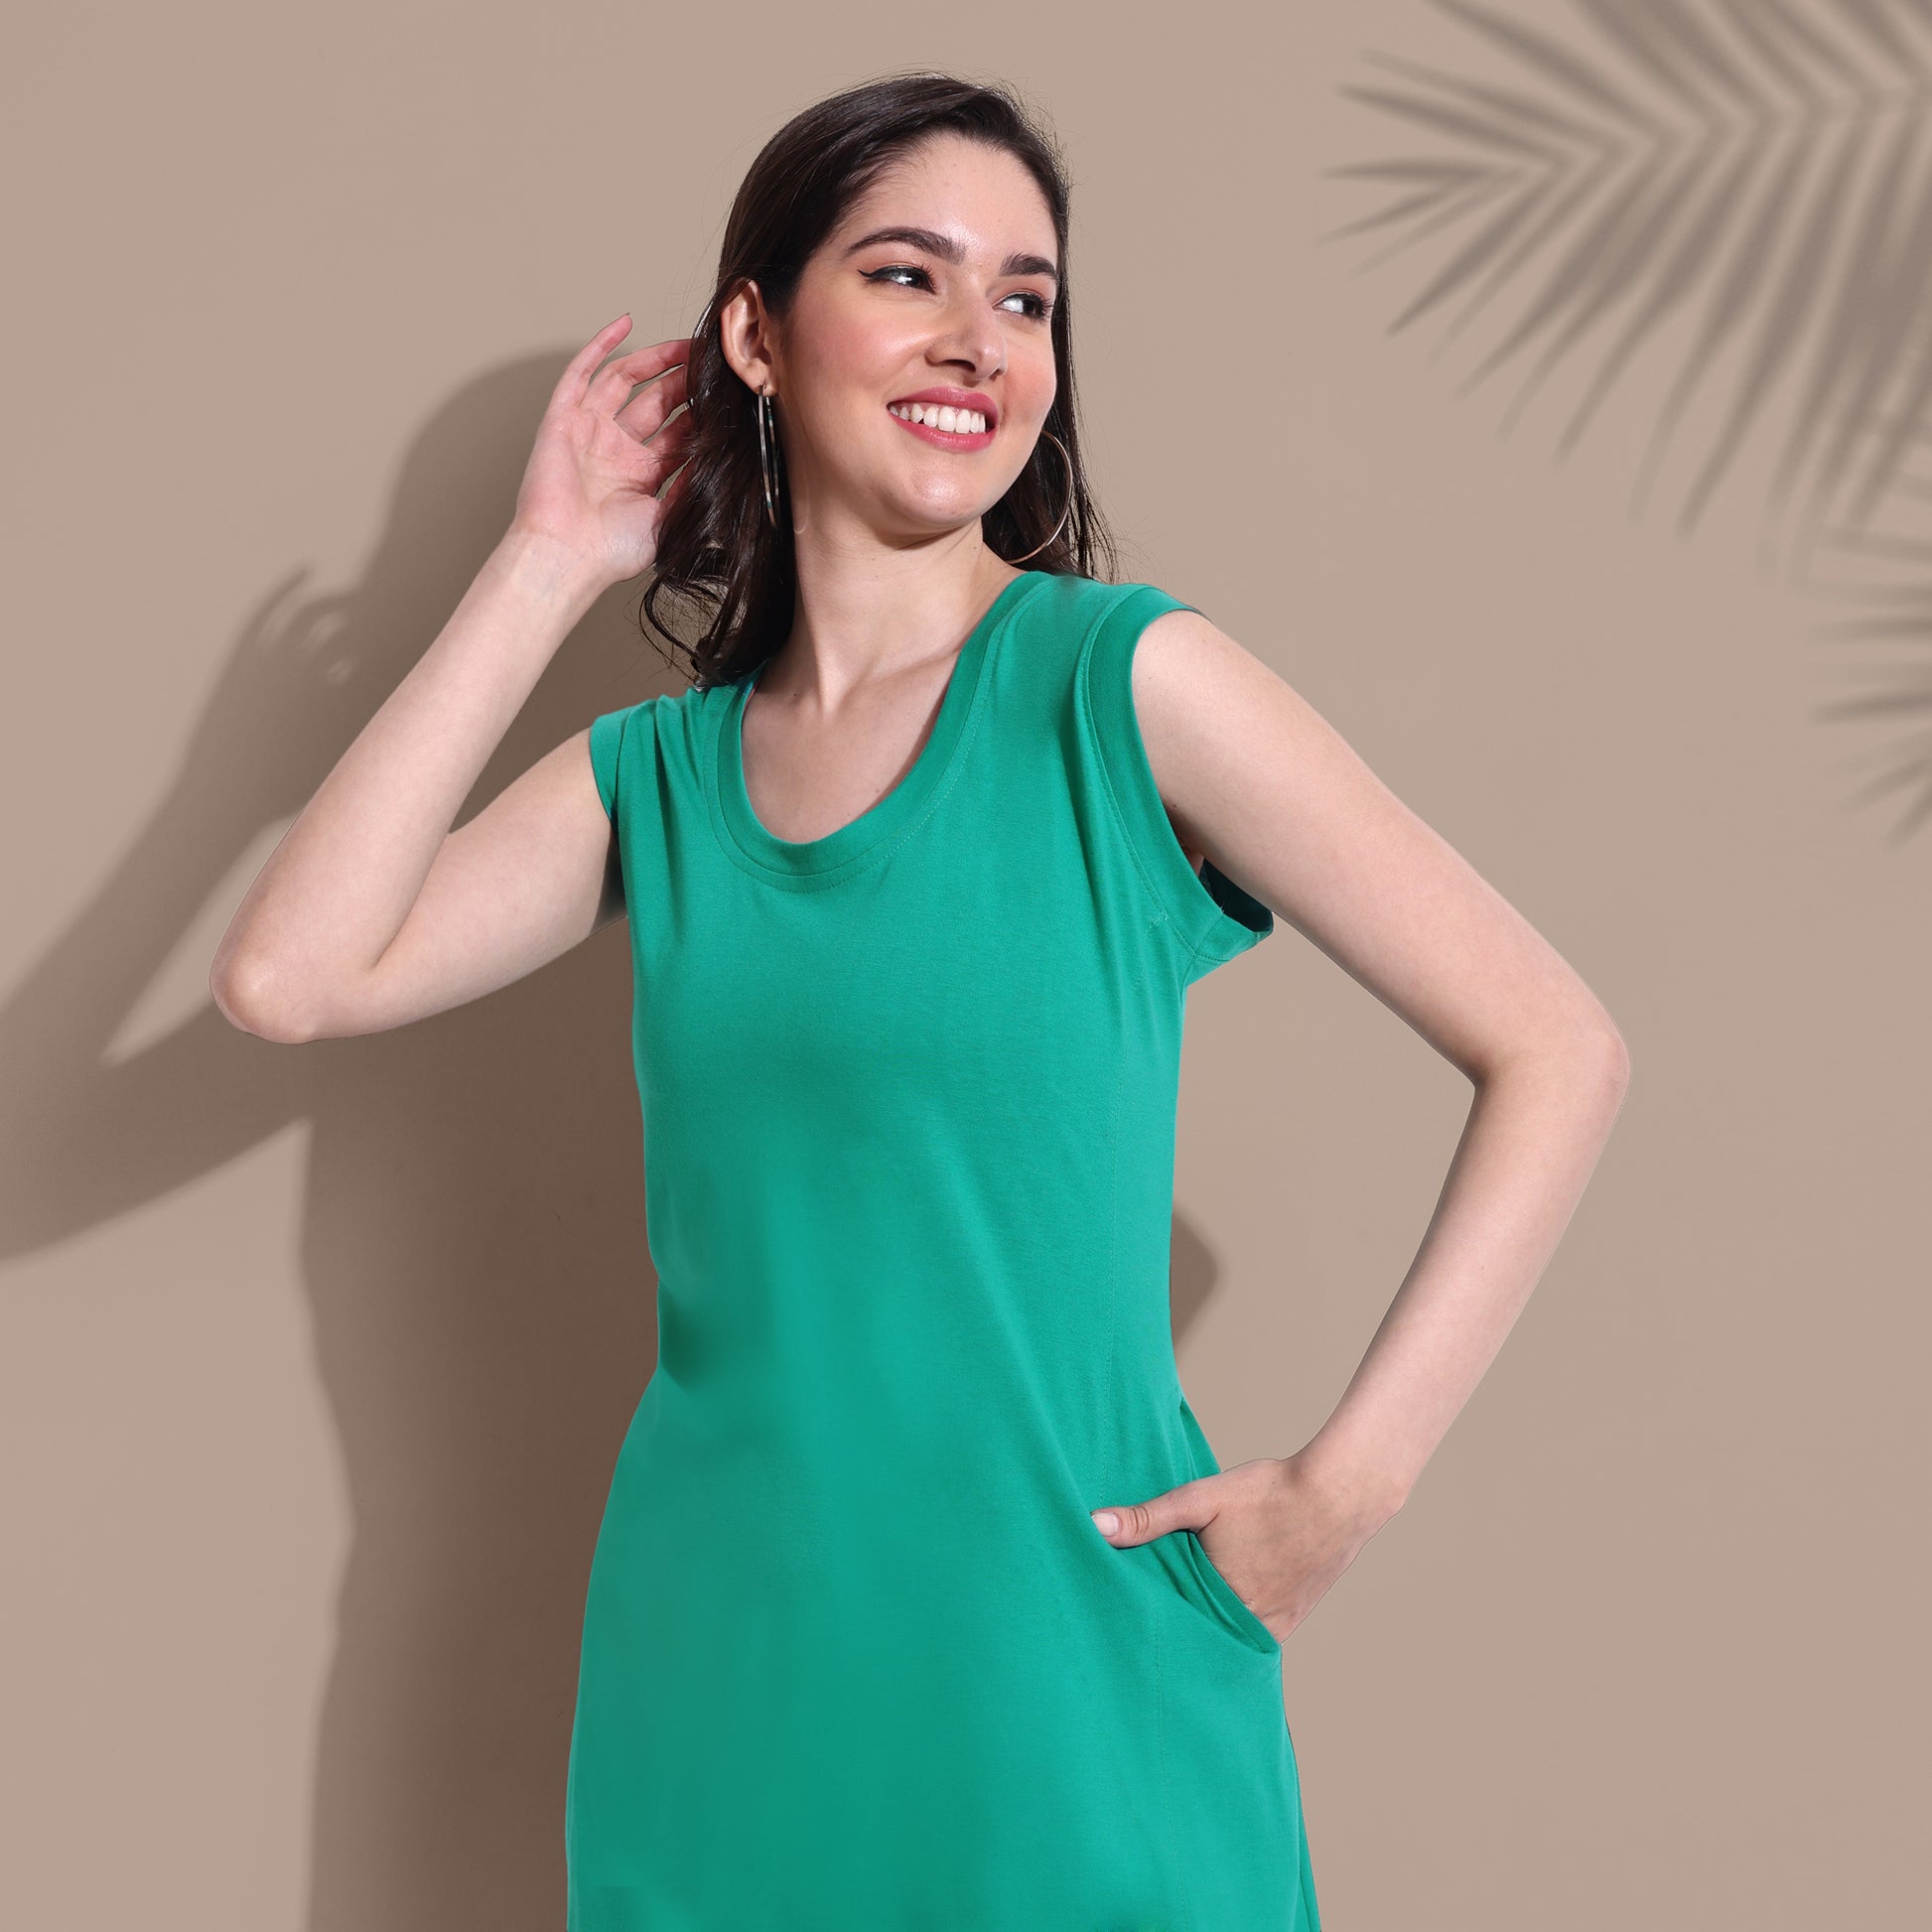 Persian Green Comfortable Breezy Lounge Dress for Summer online in India at best prices